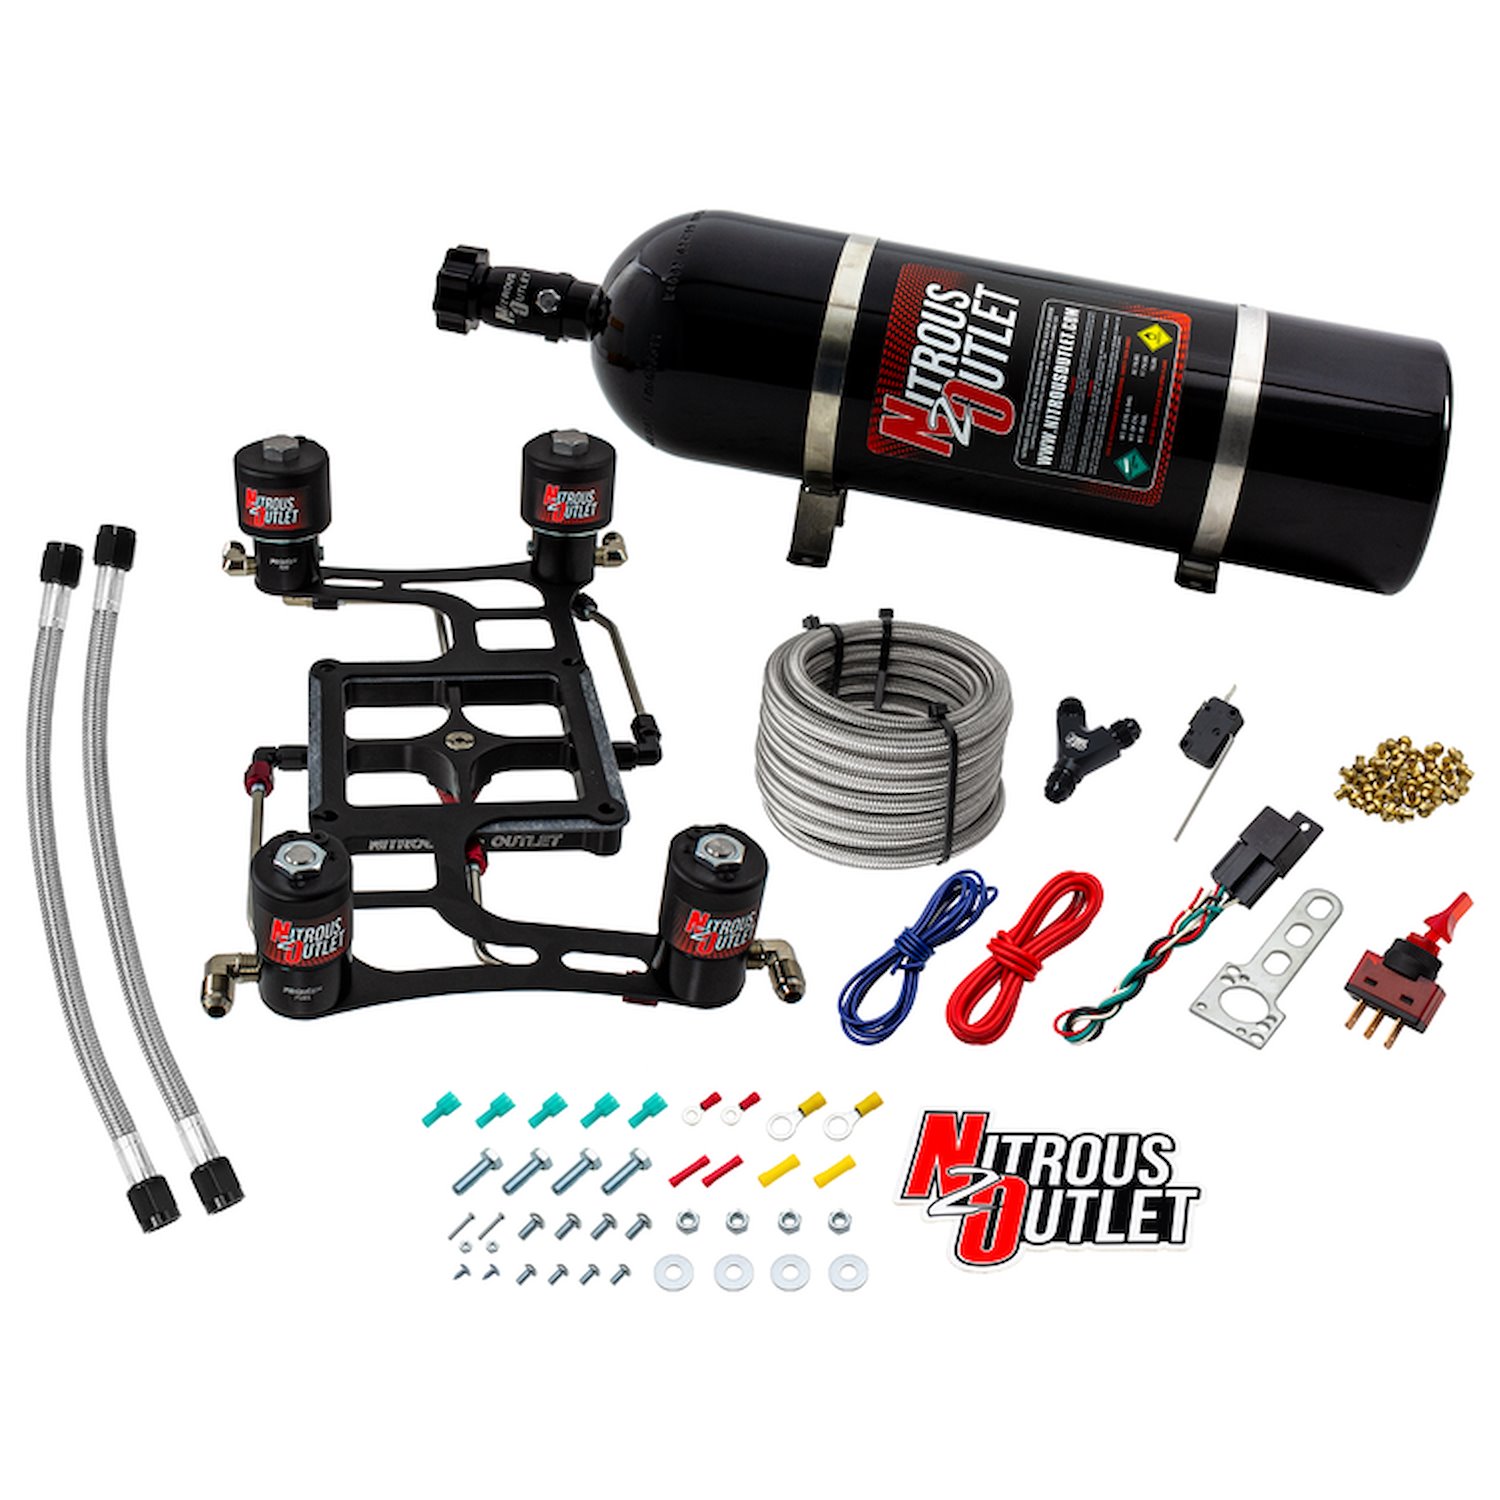 00-10640-15 4500 Hornet 2 Race Dual-Stage System, Hard-Line